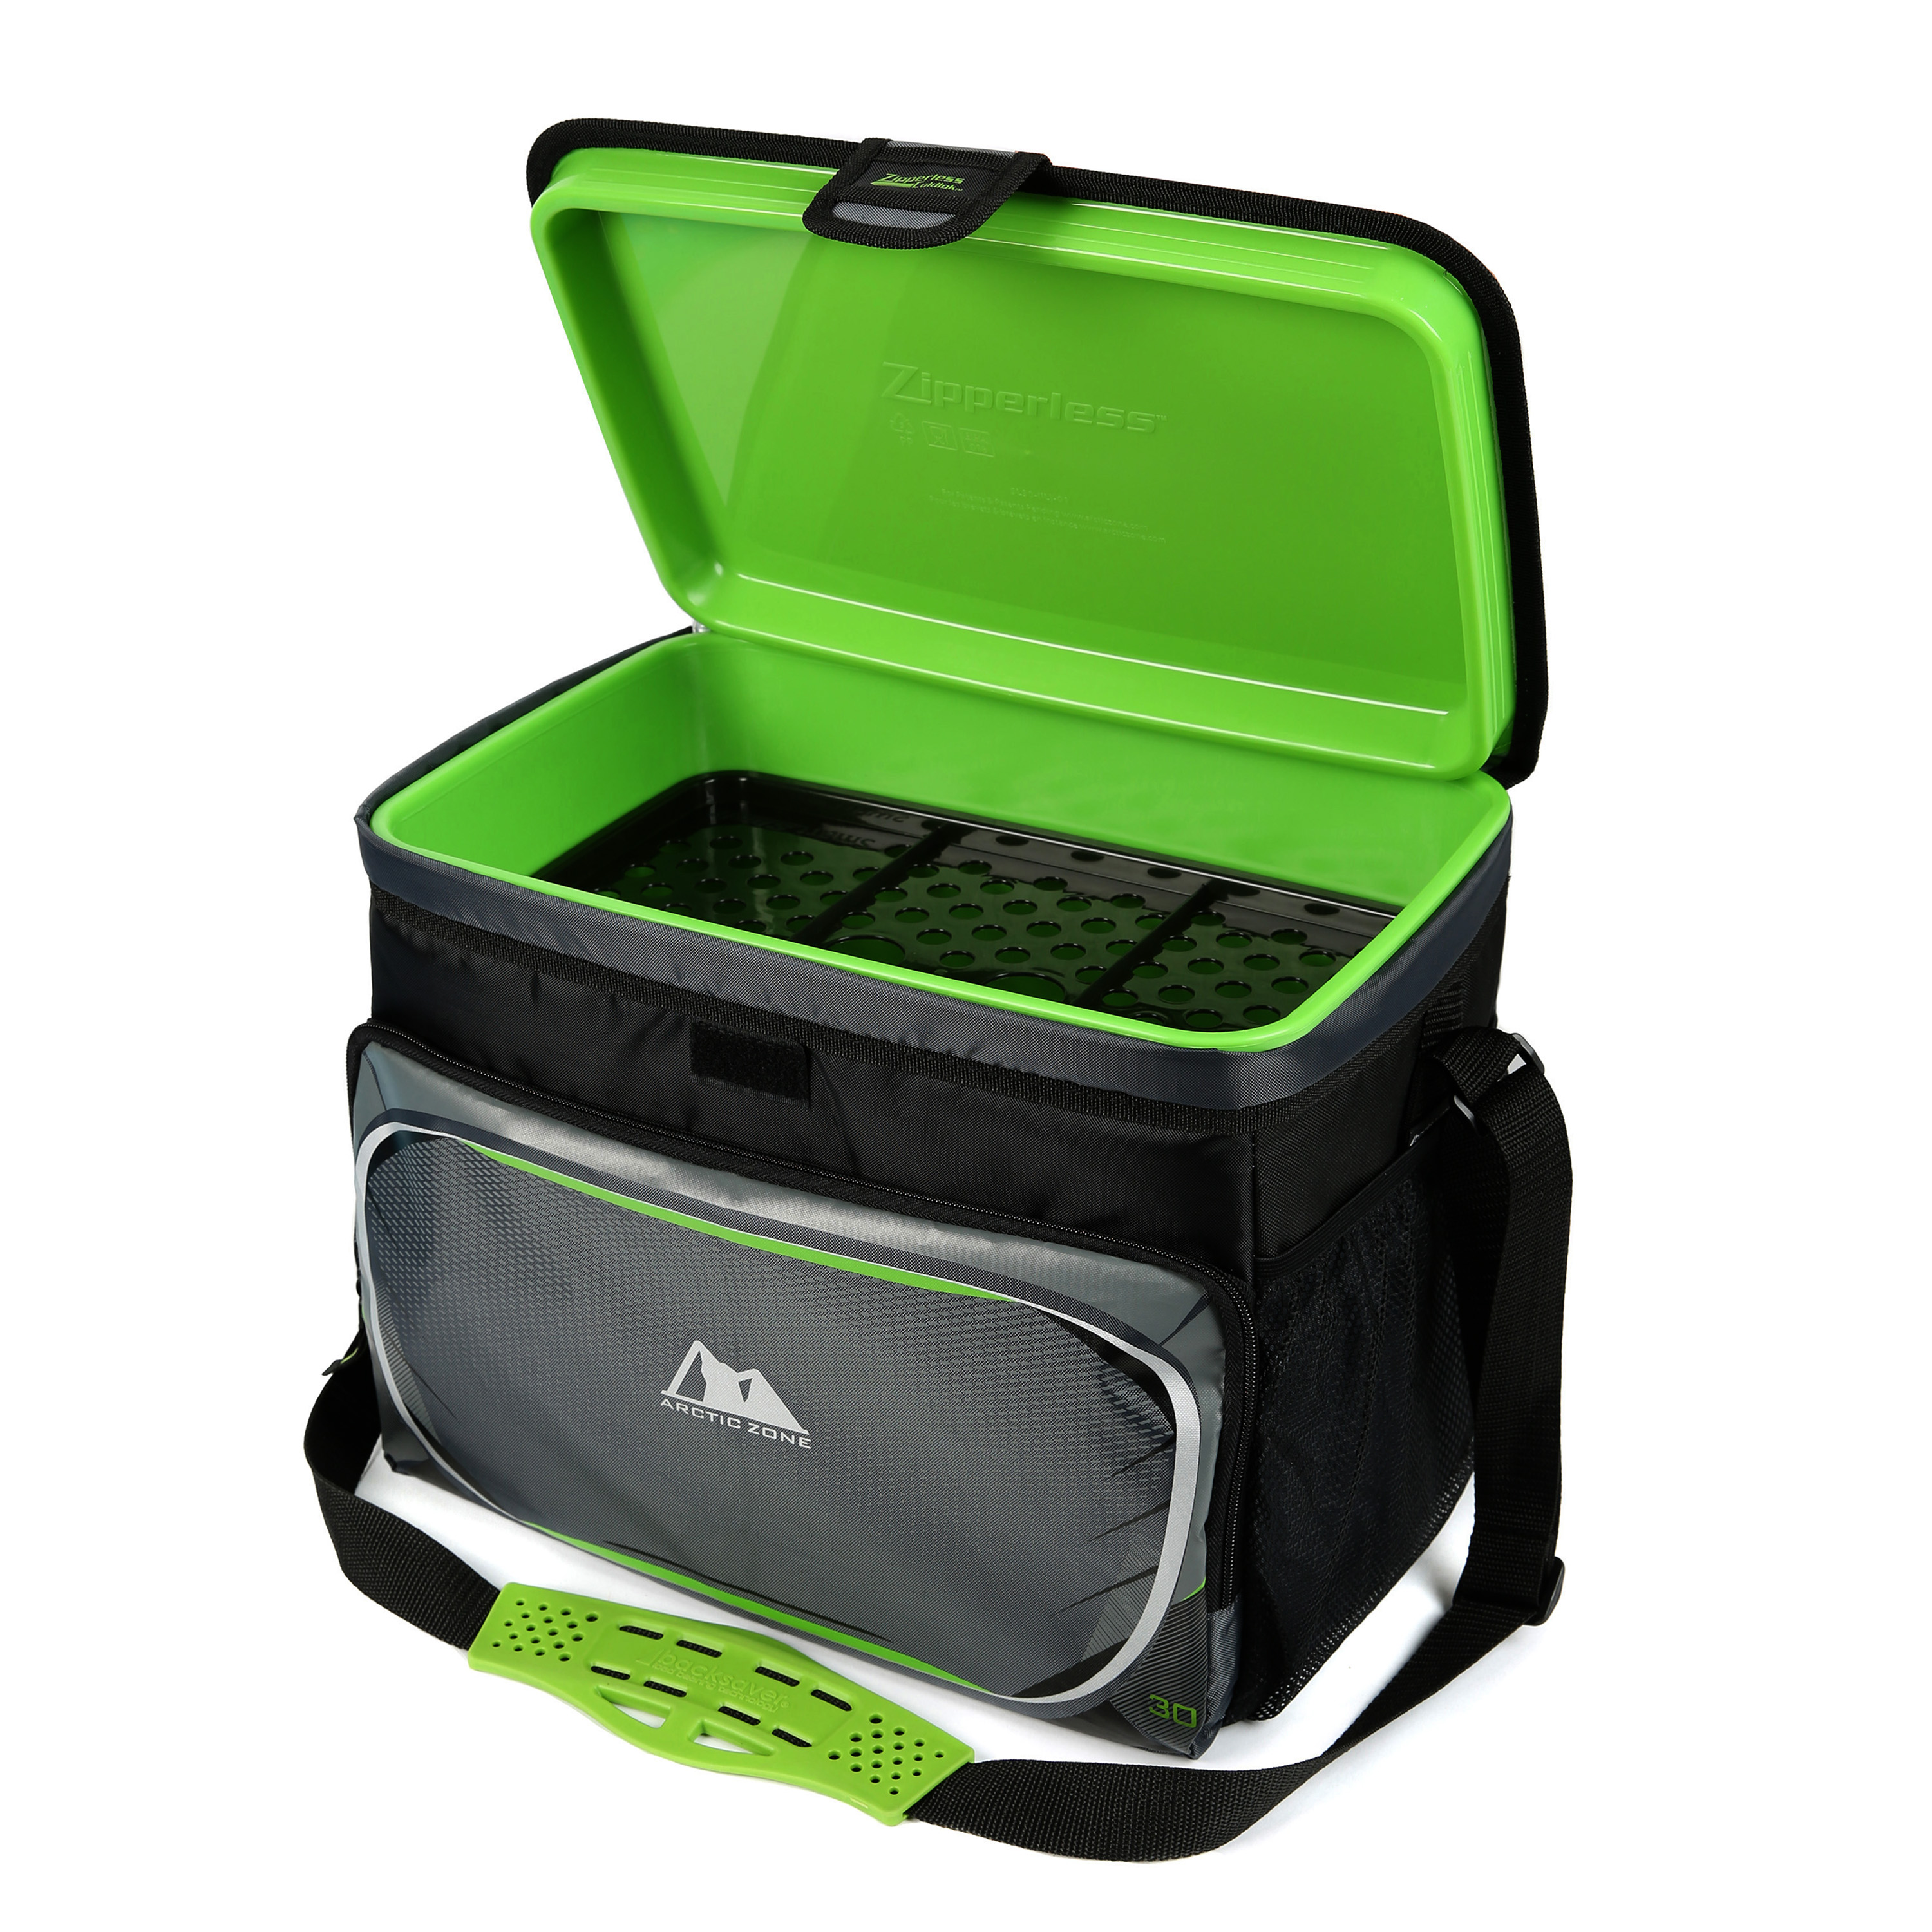 Arctic Zone 30 cans Zipperless Soft Sided Cooler with Hard Liner, Black and Green - image 2 of 11